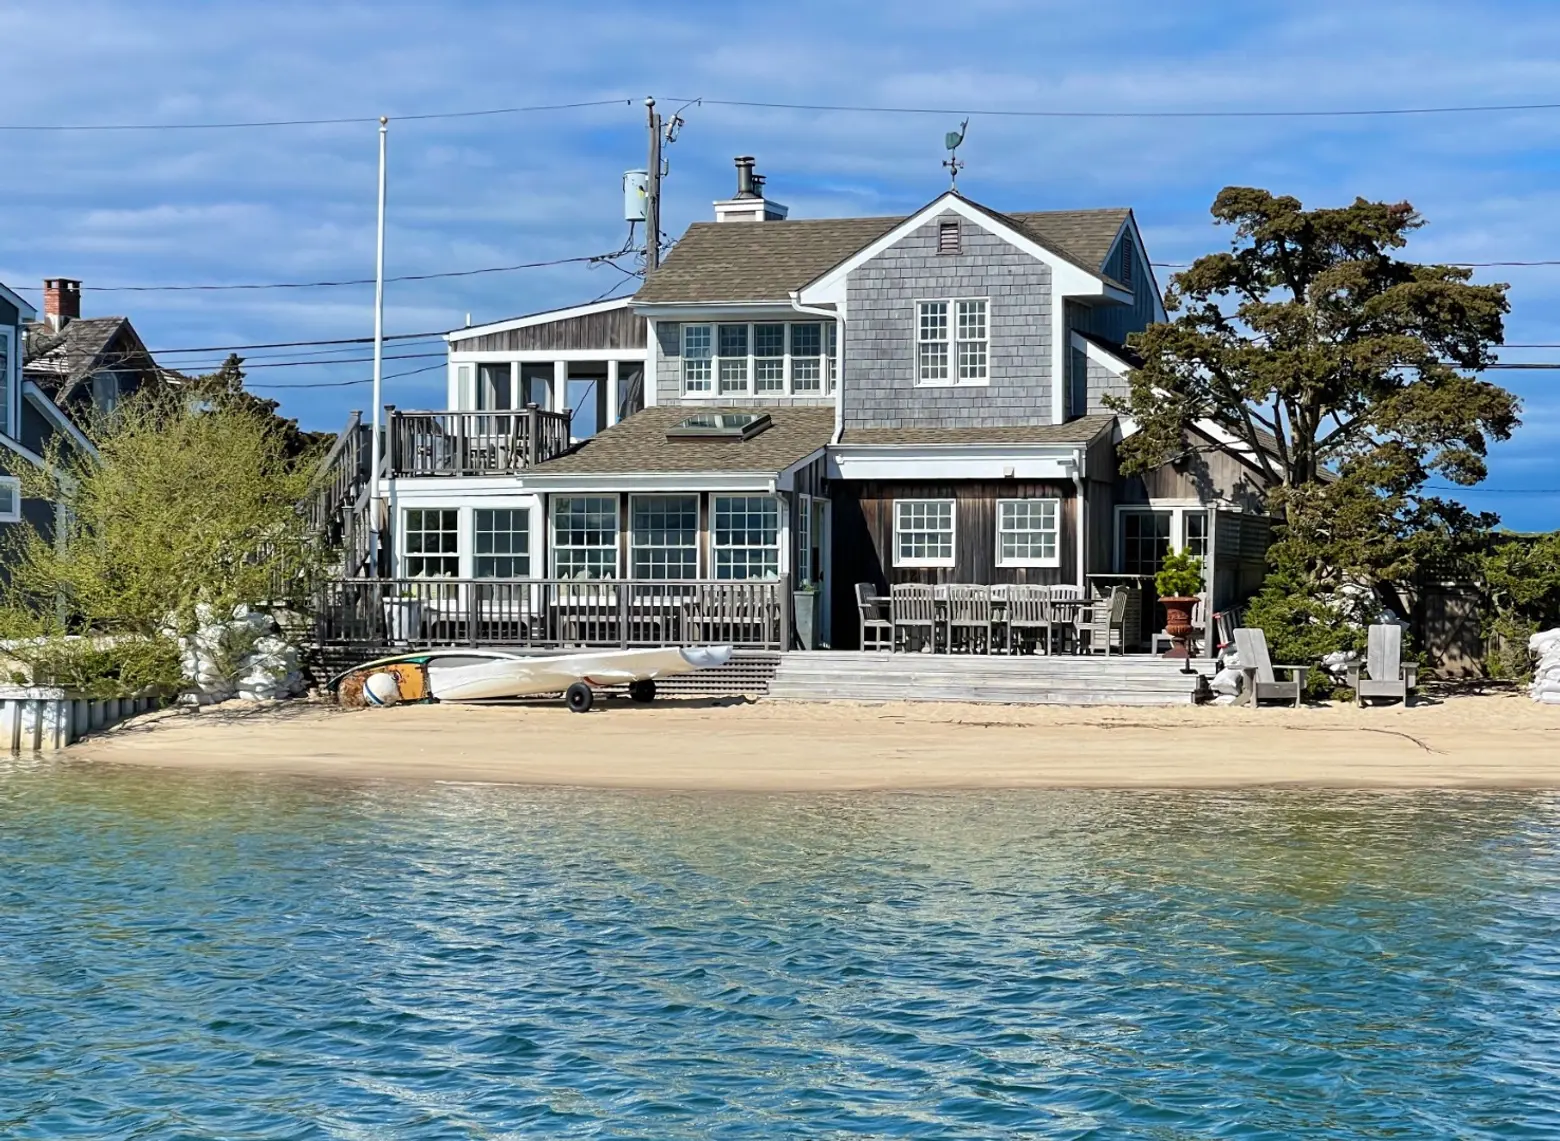 For $2.4M, this harborside Southampton cottage comes with a private beach